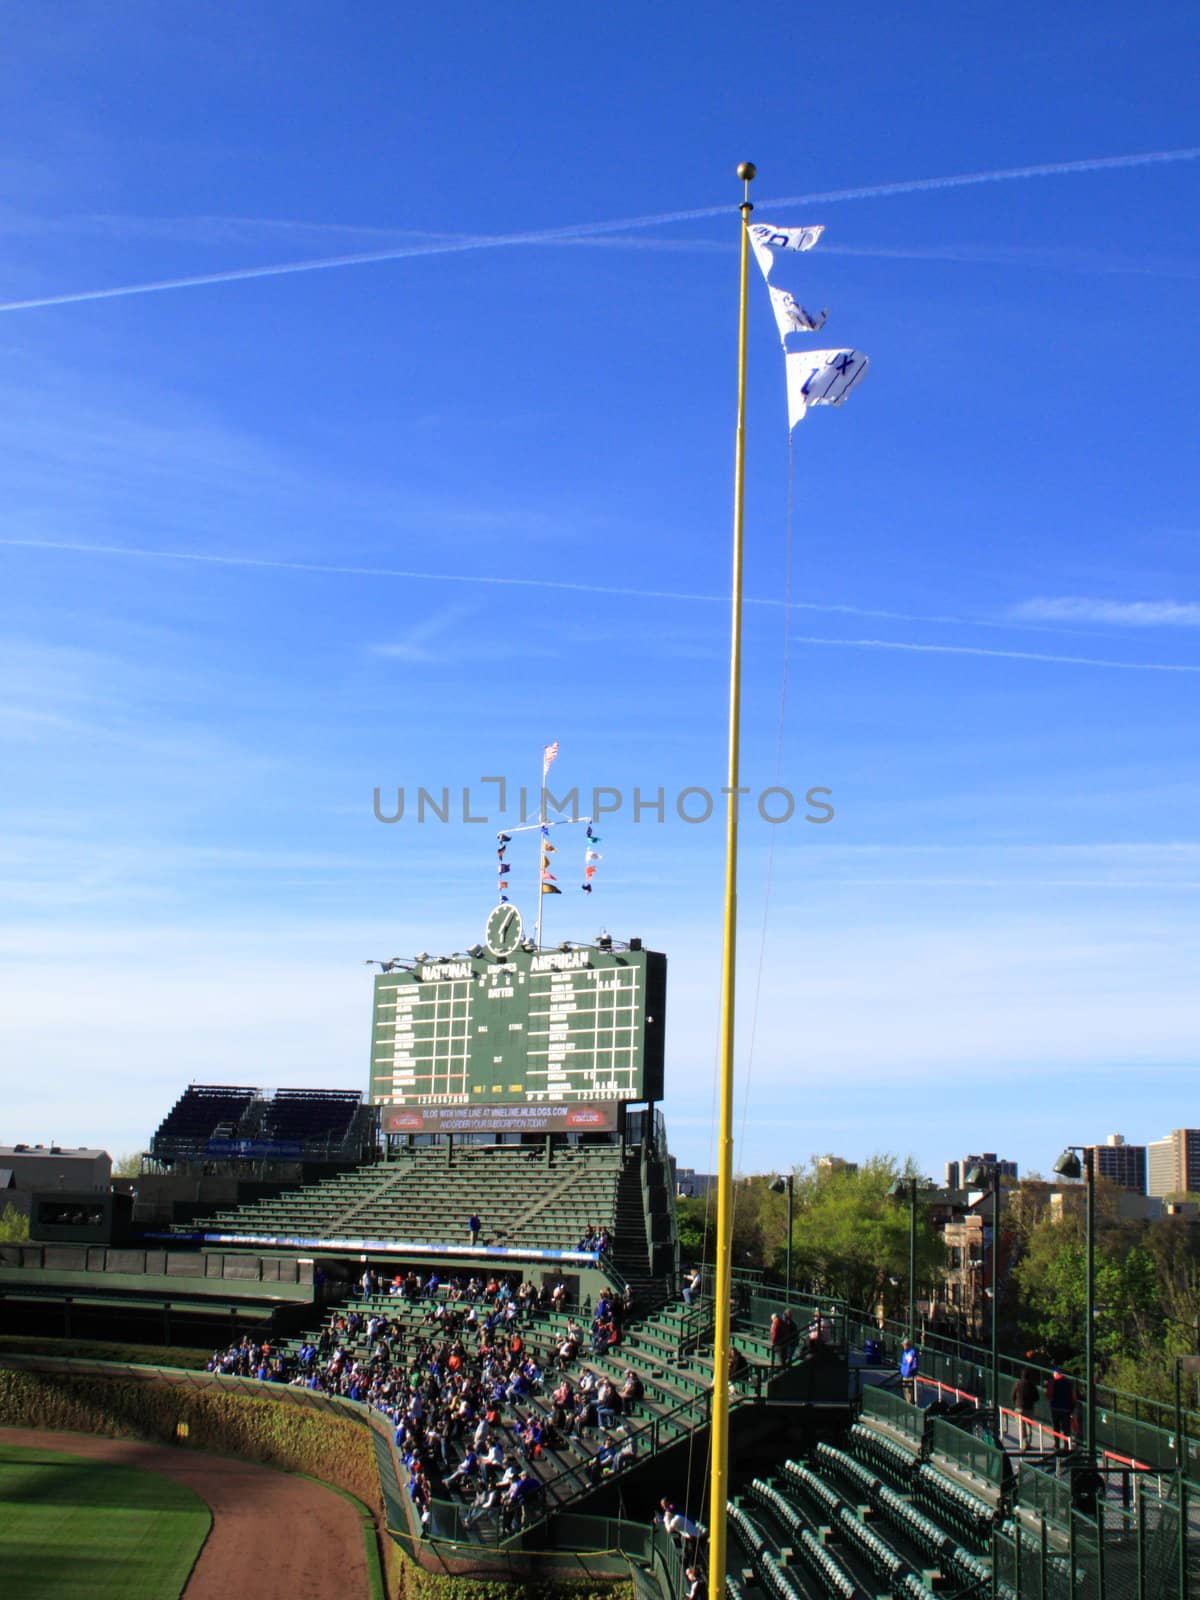 Famous scoreboard, ivy and bleachers before a Cubs game against the Washington Nationals